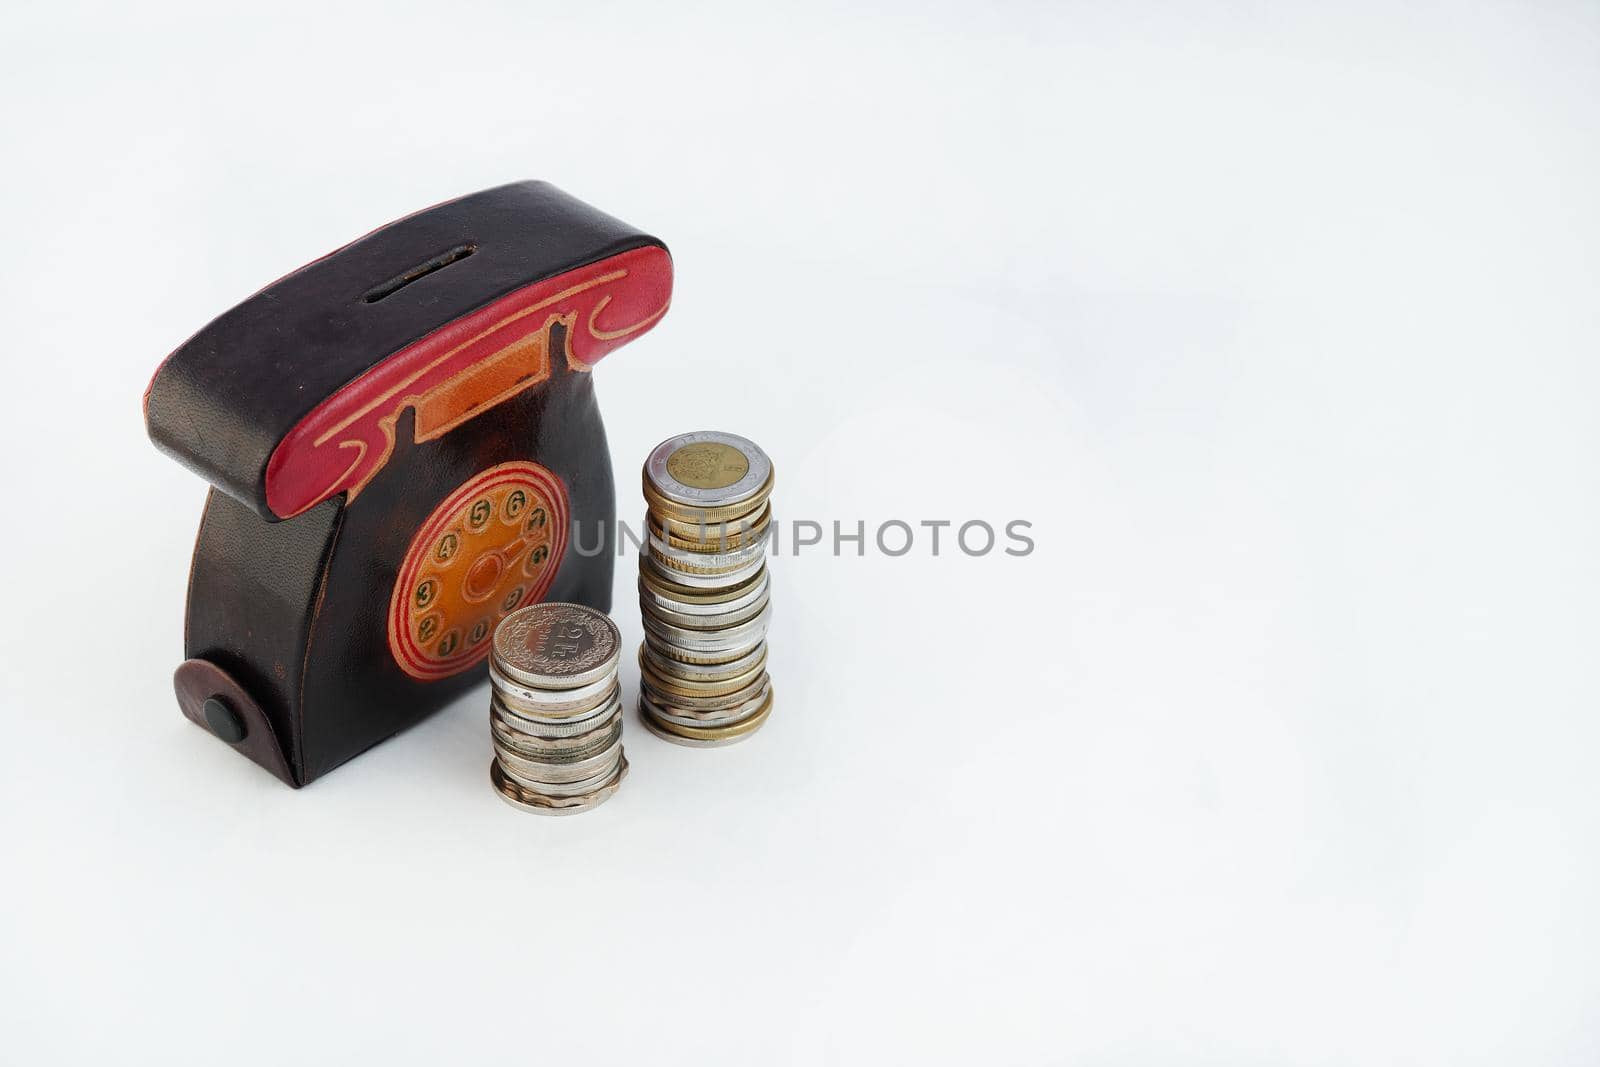 A money box with coins is isolated on a white background with a place for an inscription. High quality photo